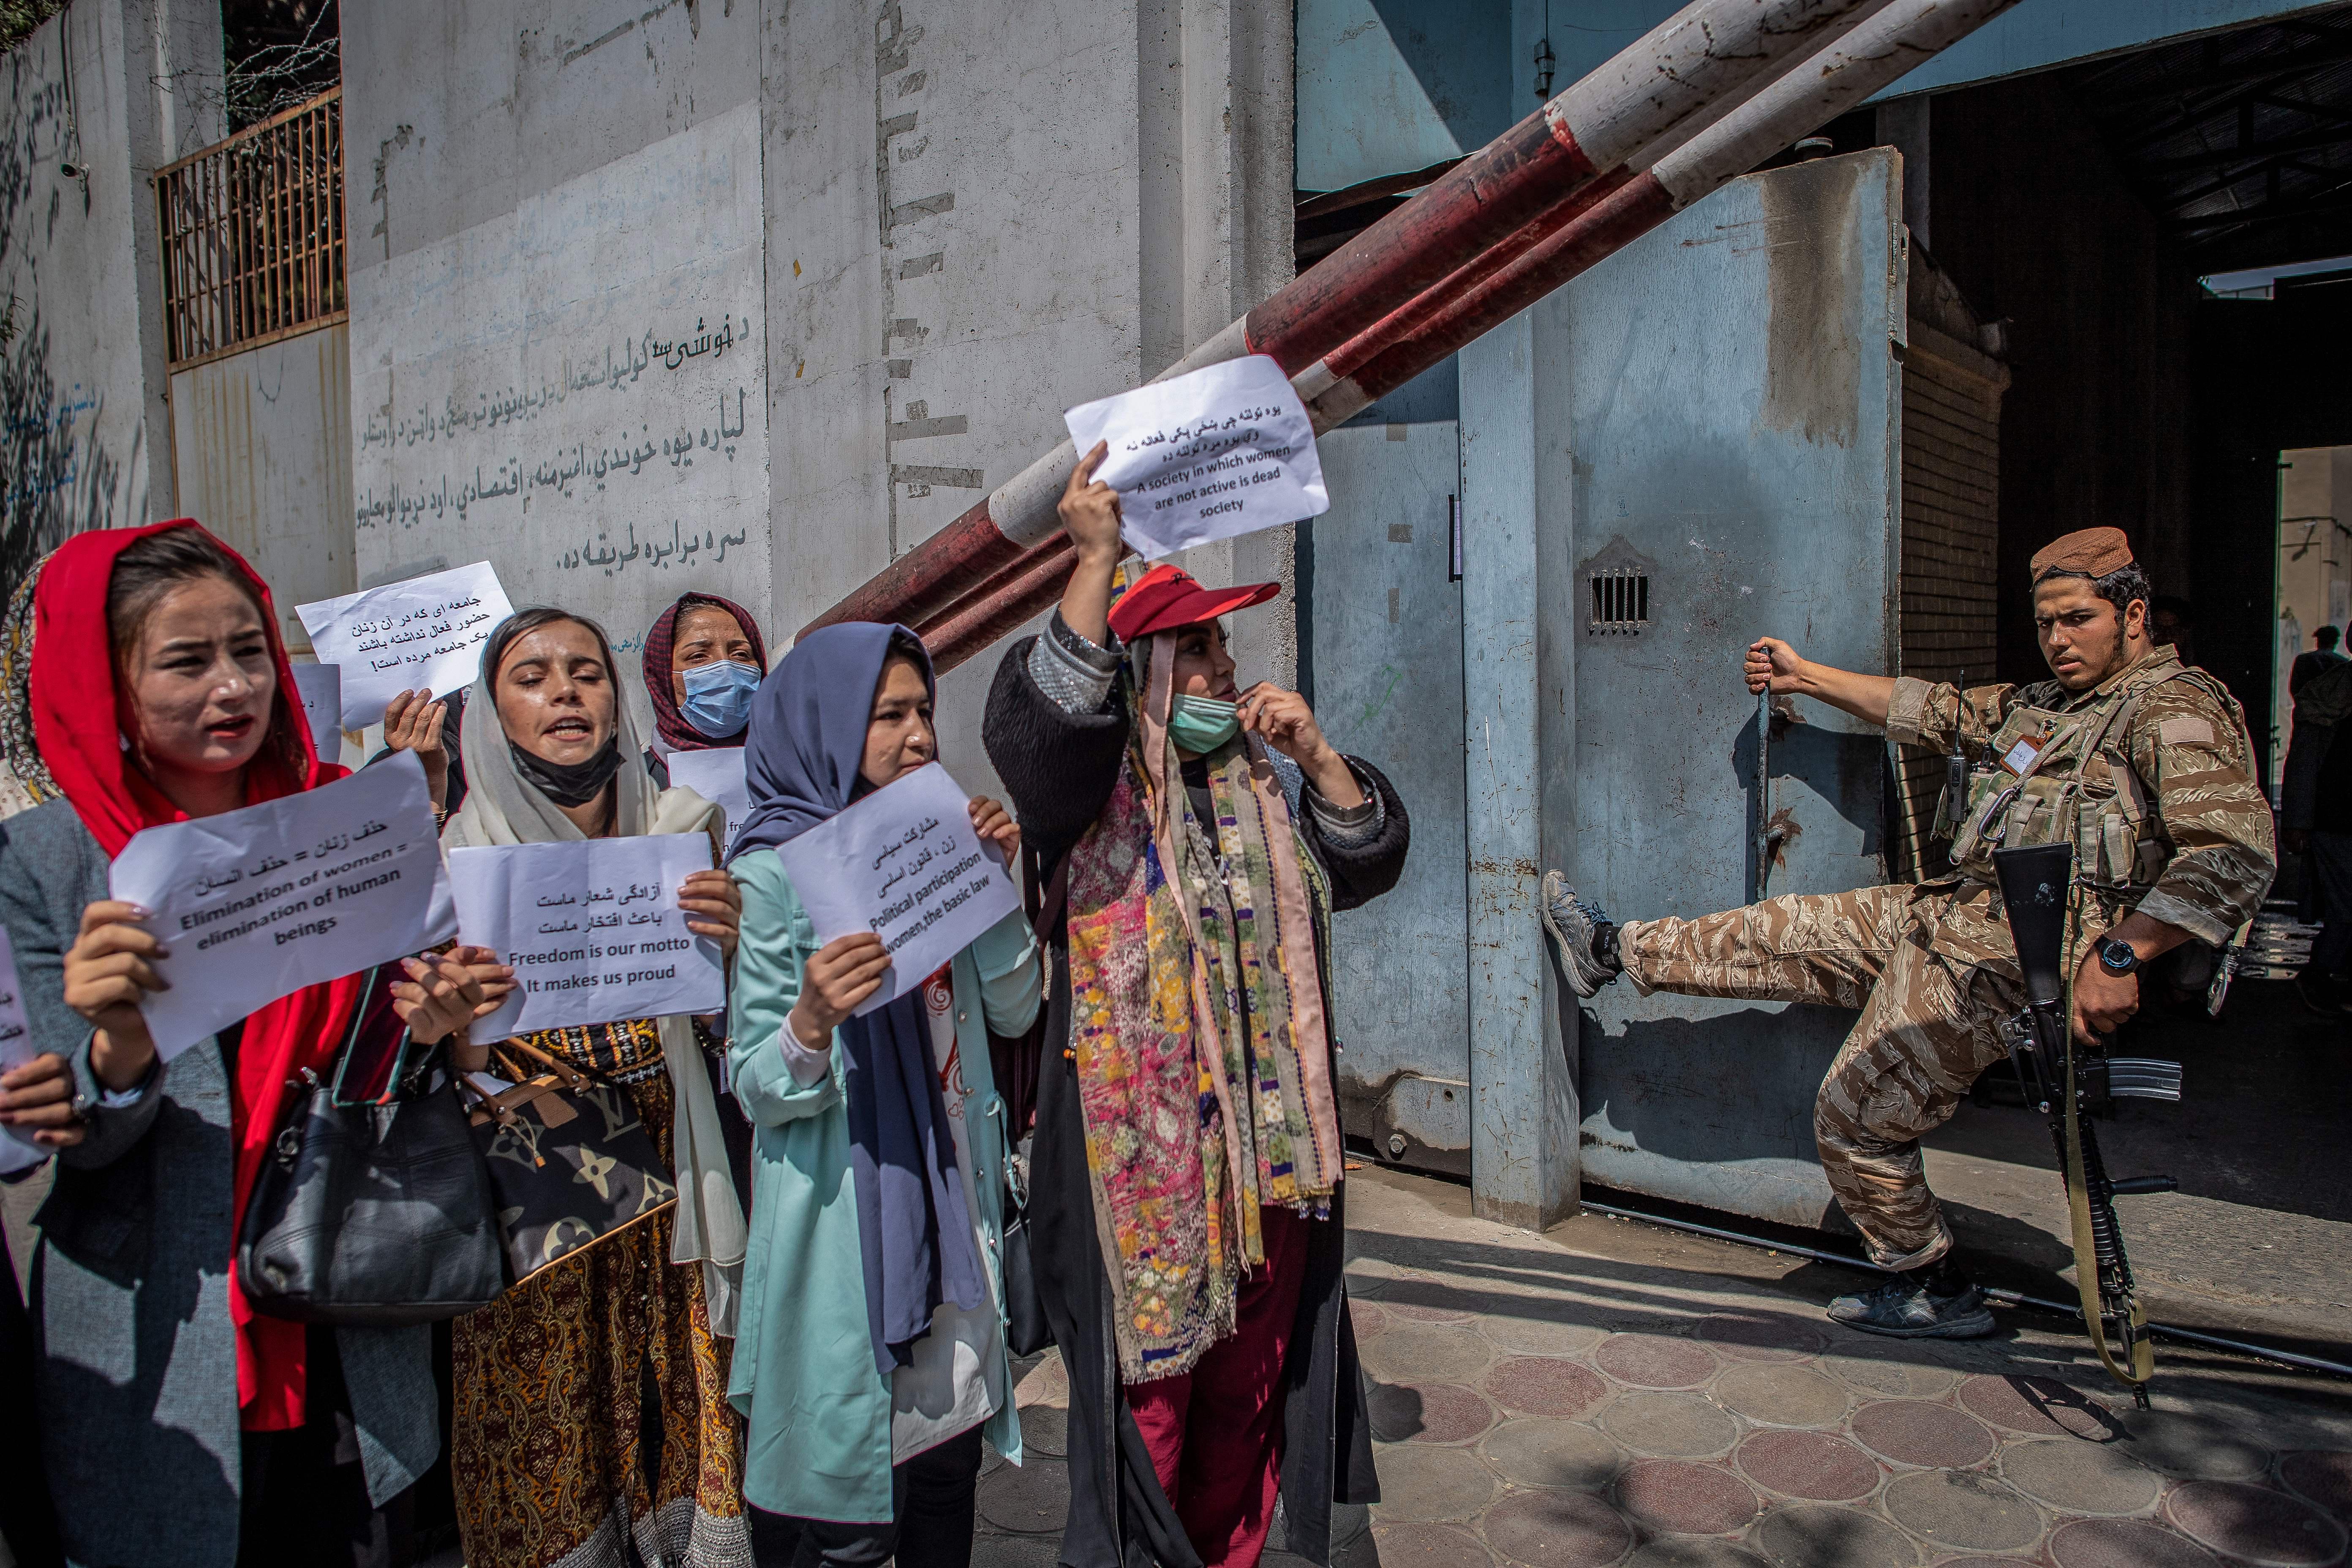 A Taliban fighter watches as Afghan women hold placards during a demonstration demanding rights for women in front of the former Ministry of Women Affairs in Kabul on September 19, 2021. 